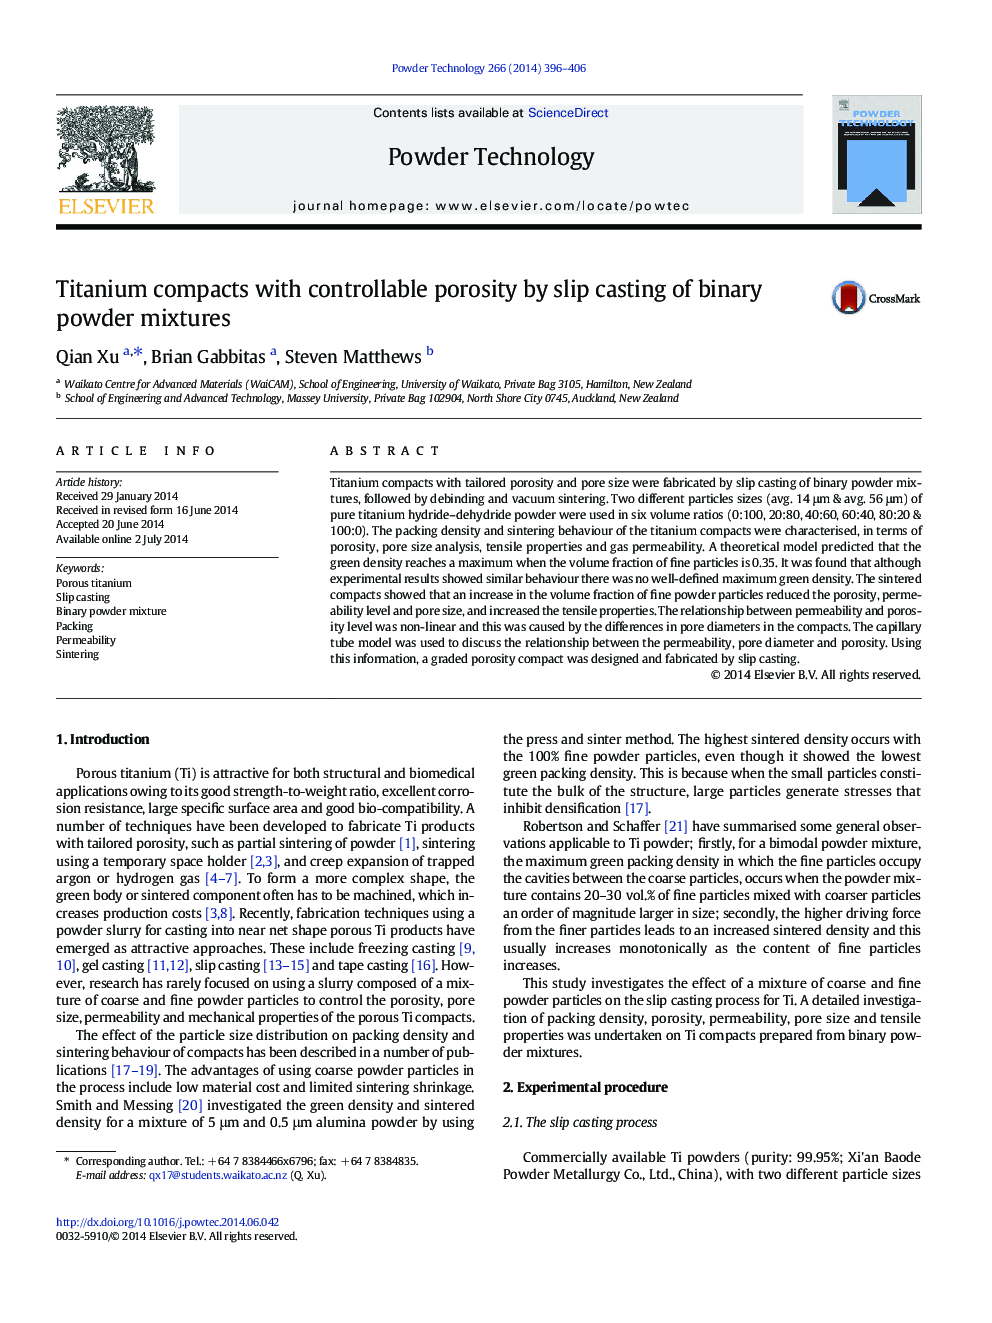 Titanium compacts with controllable porosity by slip casting of binary powder mixtures